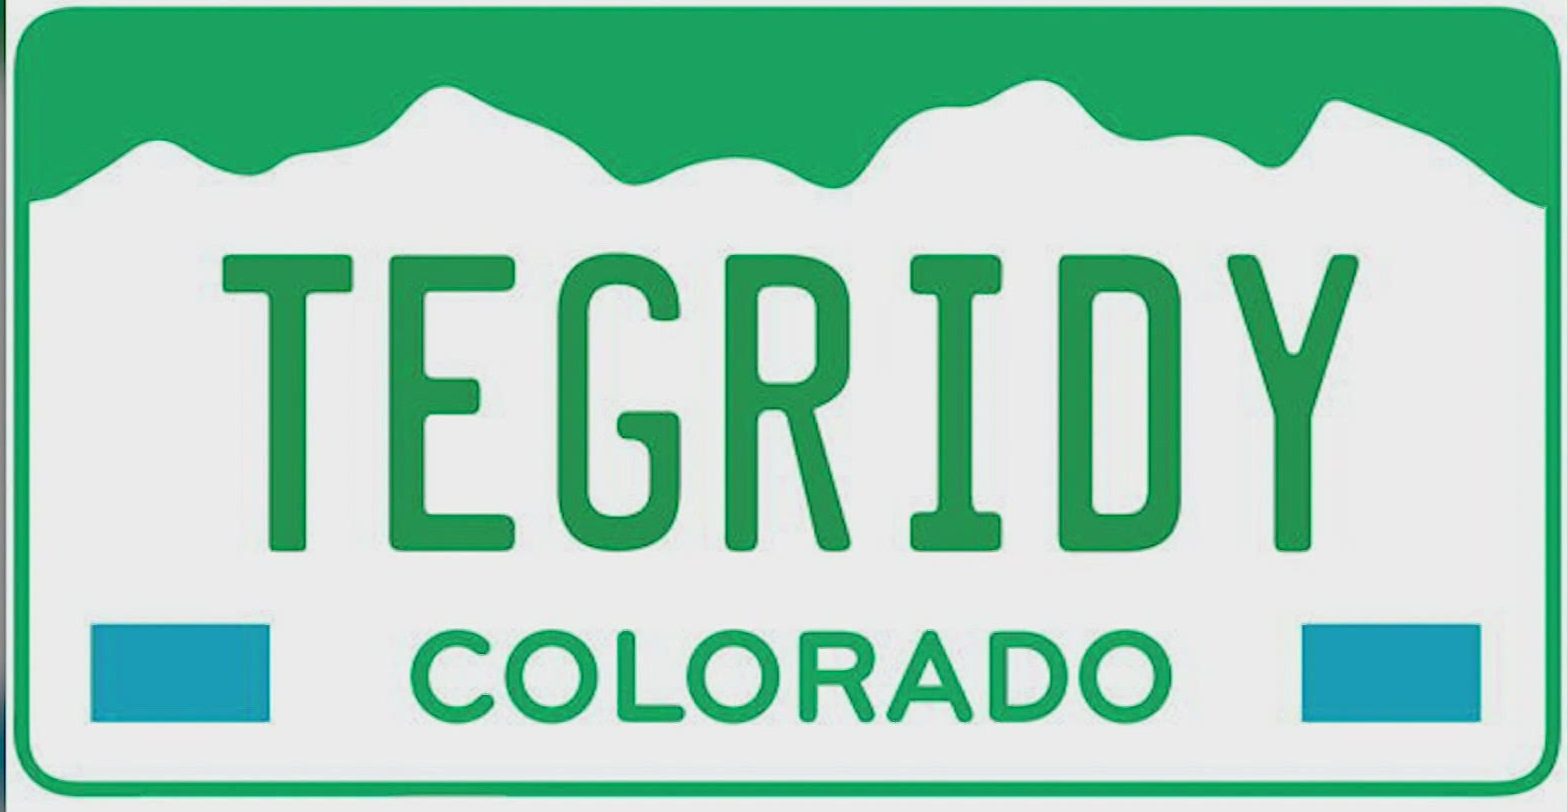 Colorado Offers Cannabis-Inspired License Plates at Auction